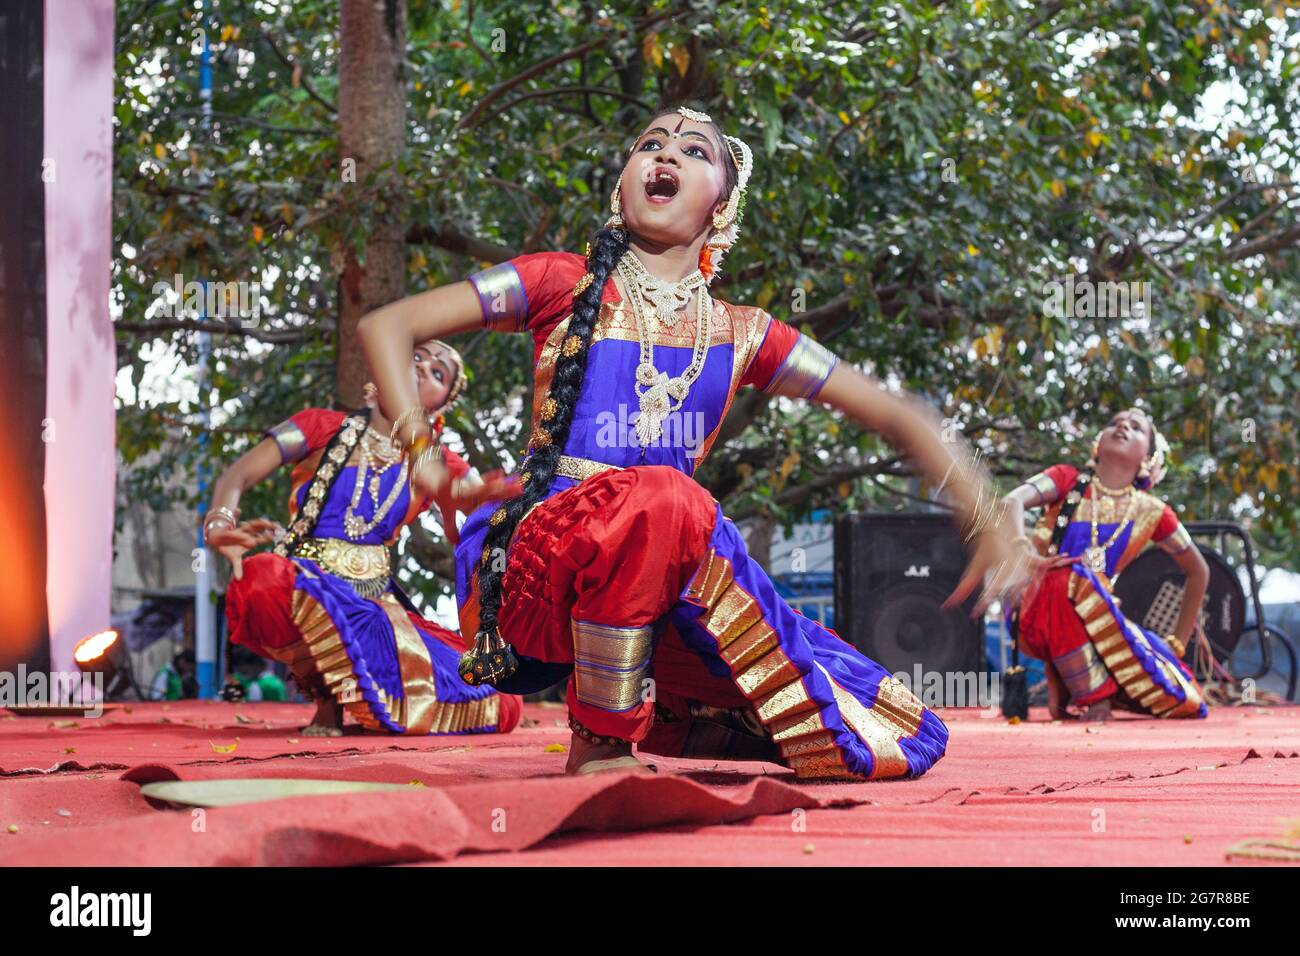 Young female Indian classical dancers in colourful costumes perform on stage, Fort Kochi (Cochin), Kerala, India Stock Photo